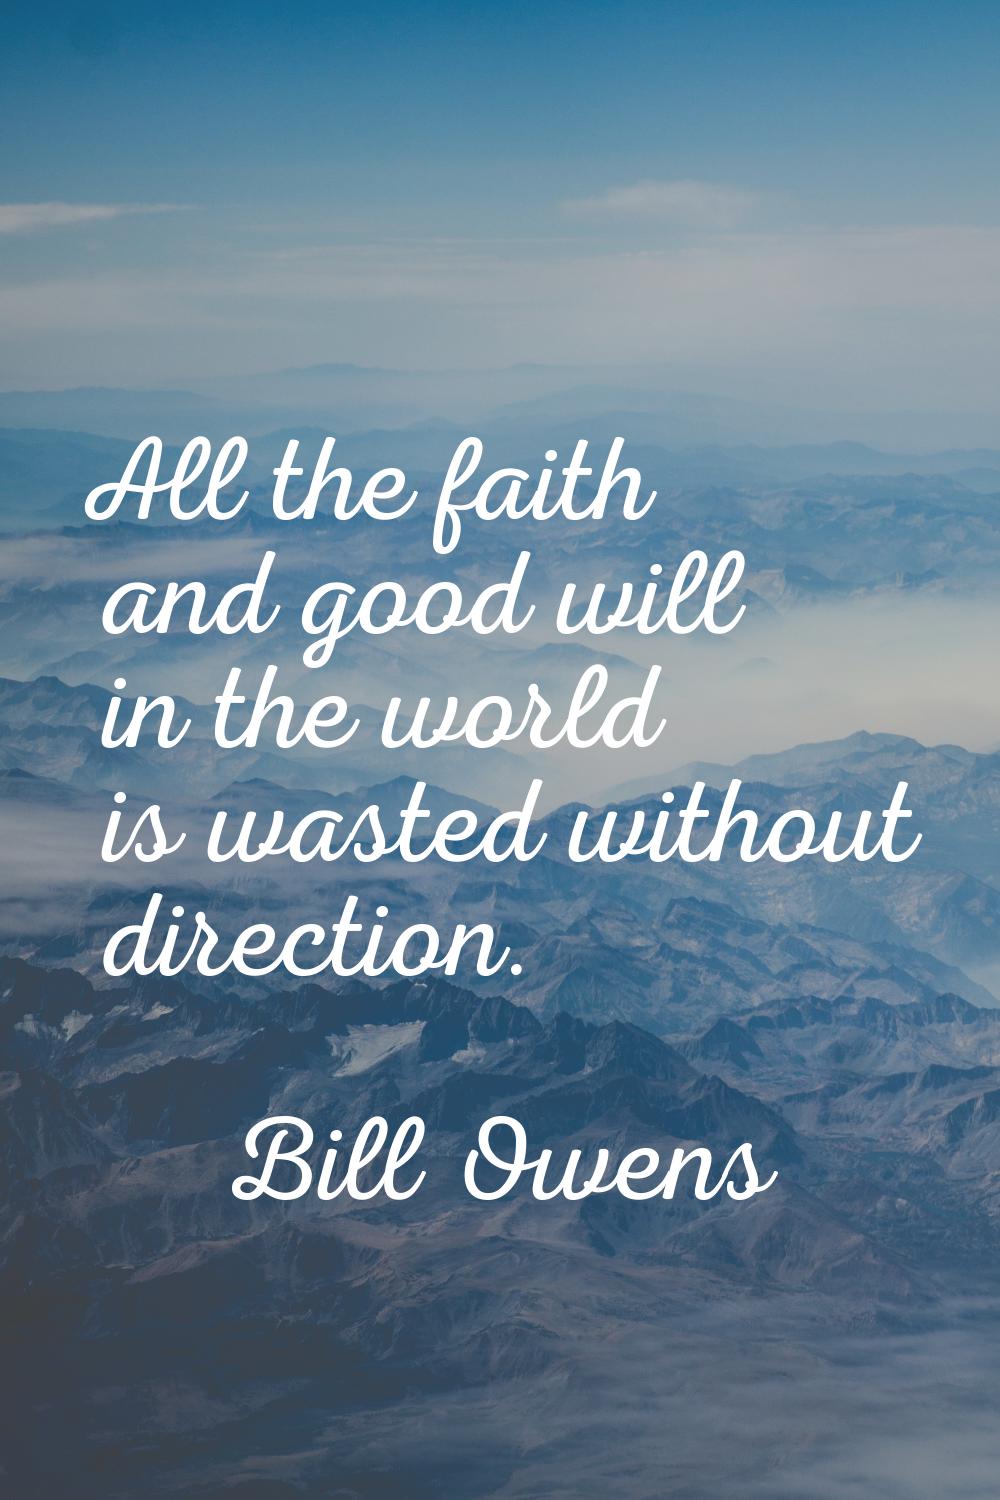 All the faith and good will in the world is wasted without direction.